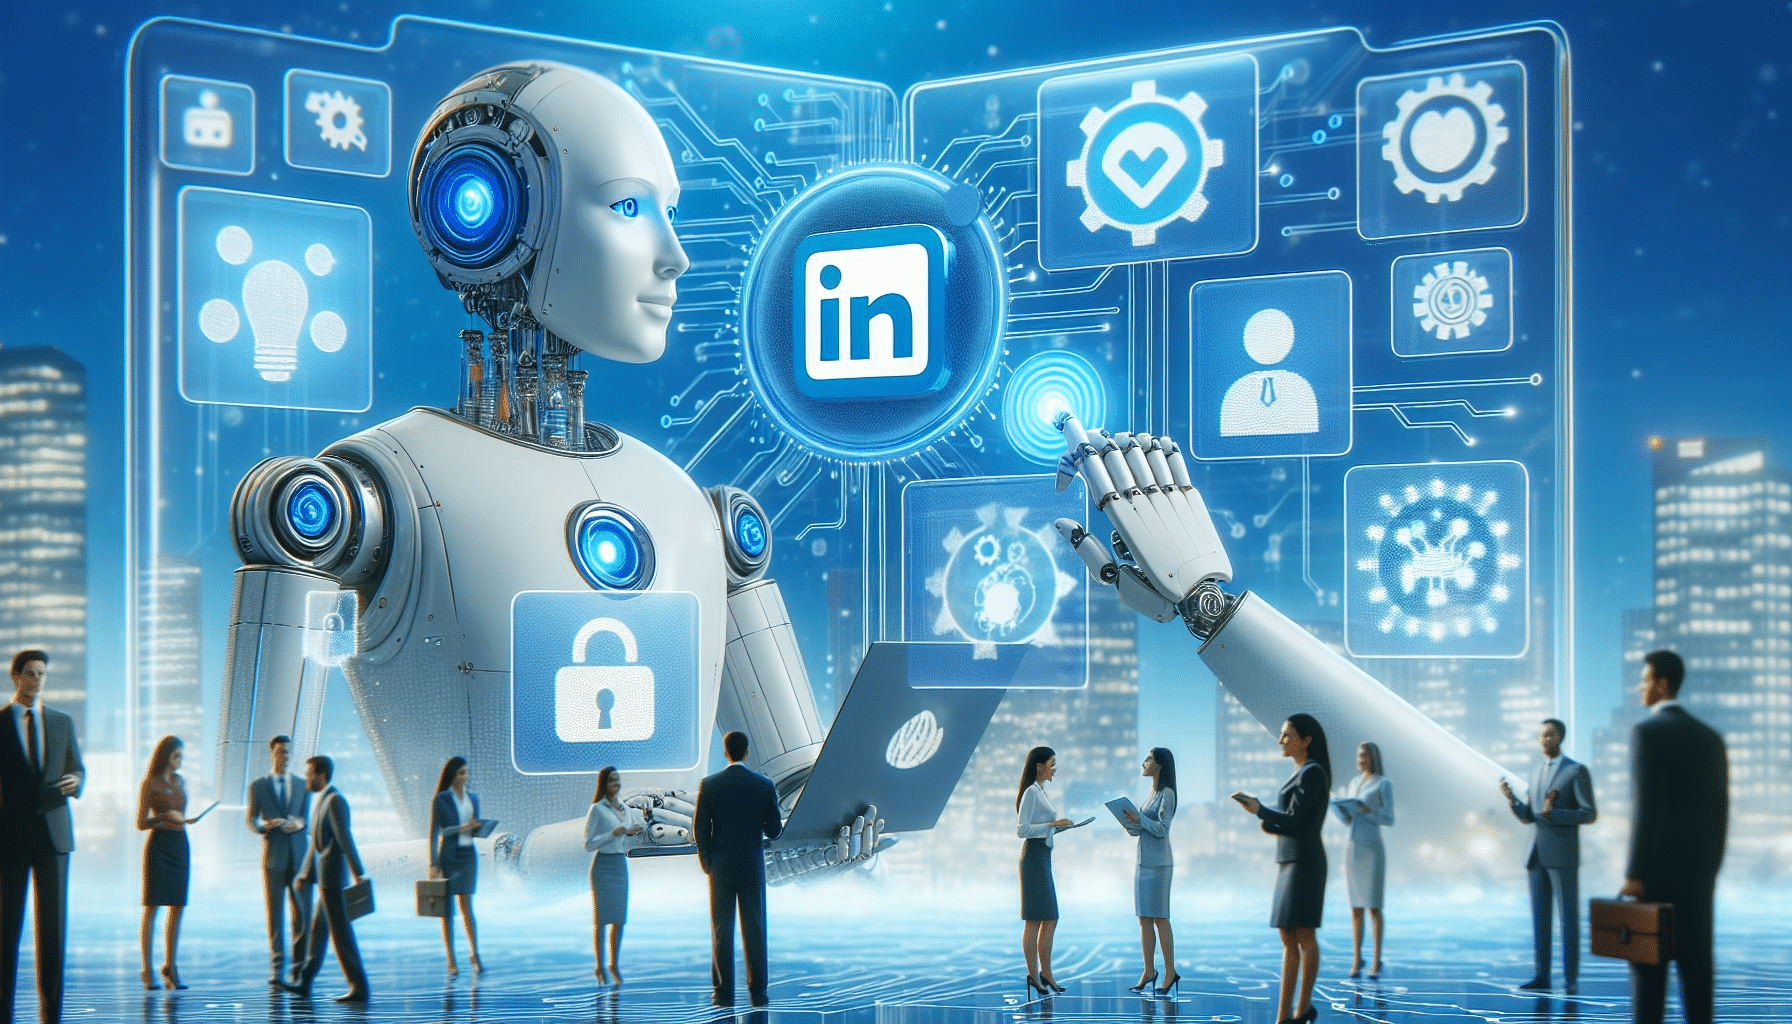 Illustration of LinkedIn AI transforming business and professional interactions.